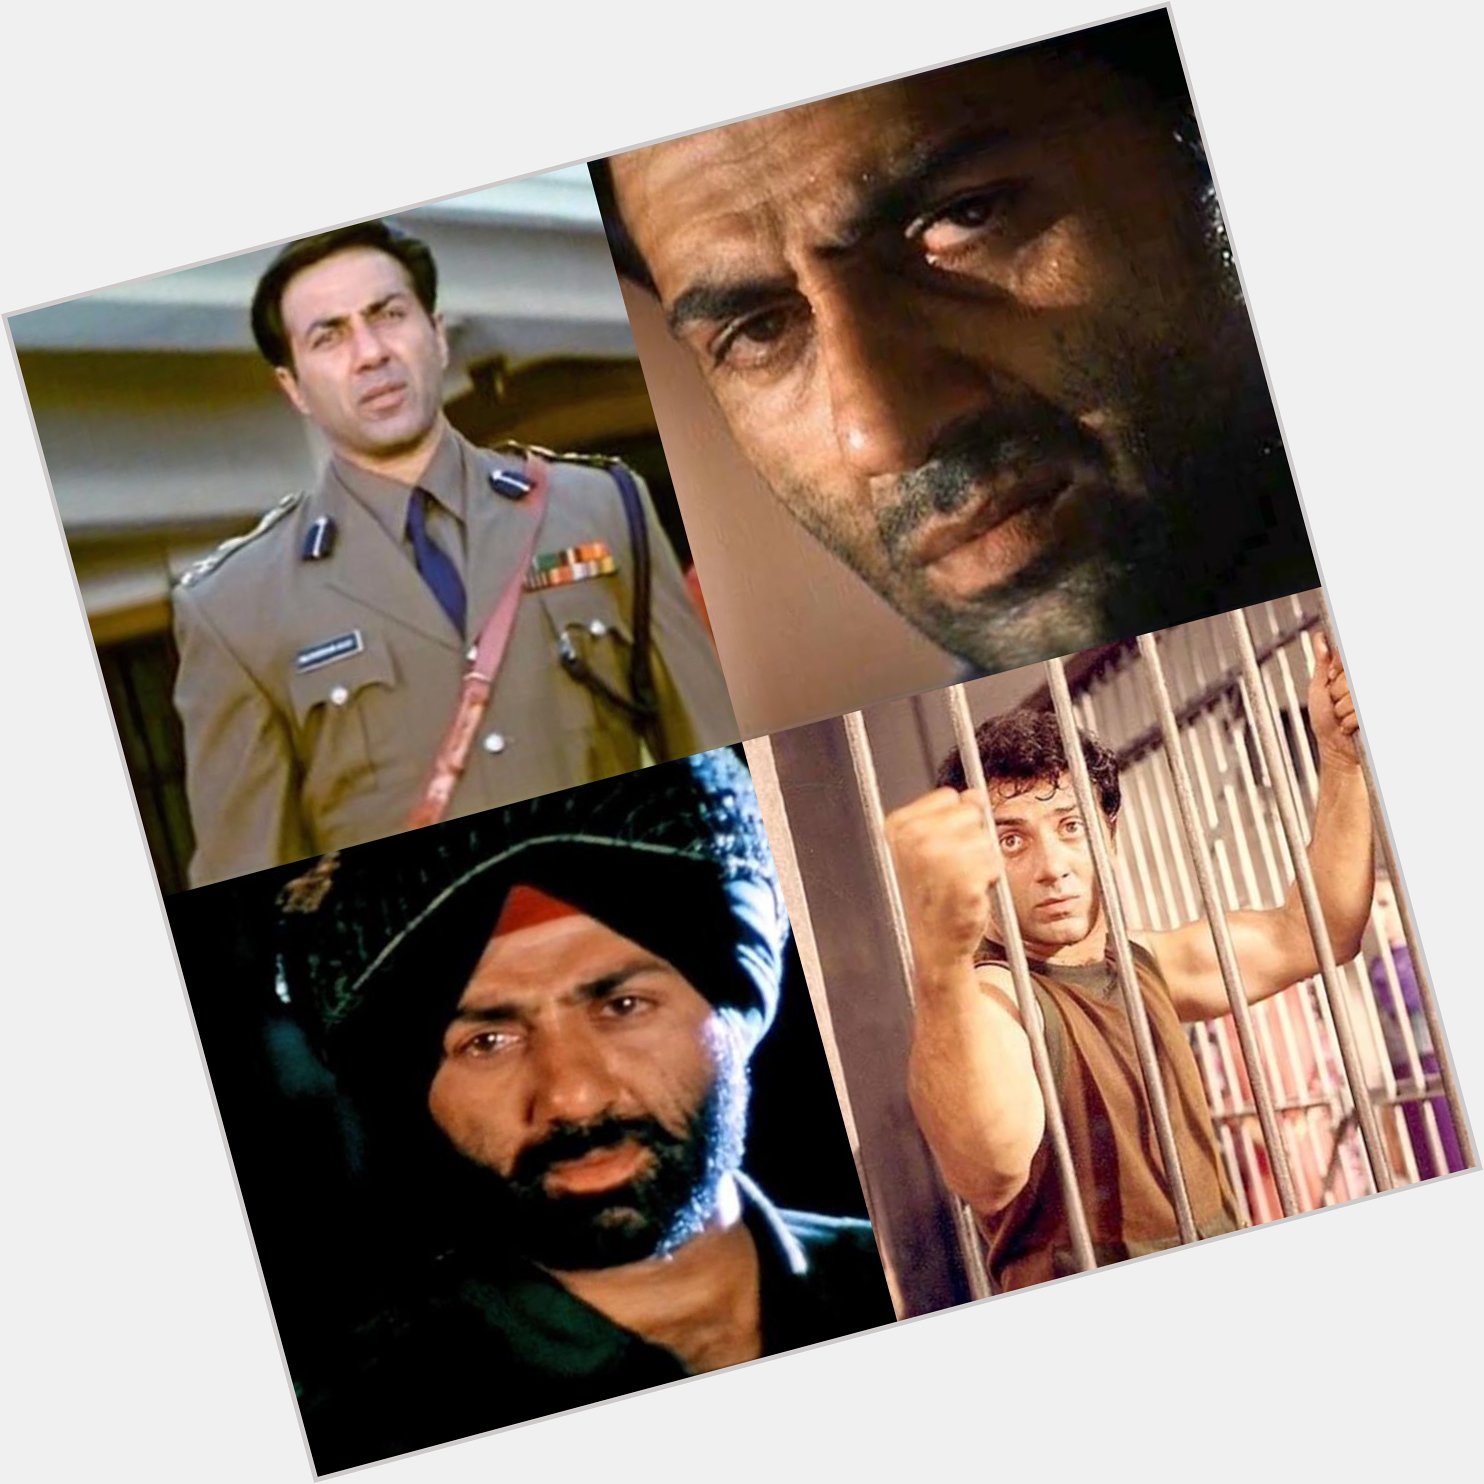 Happy Birthday to You sunny Deol sir may god bless you stay happy and healthy 